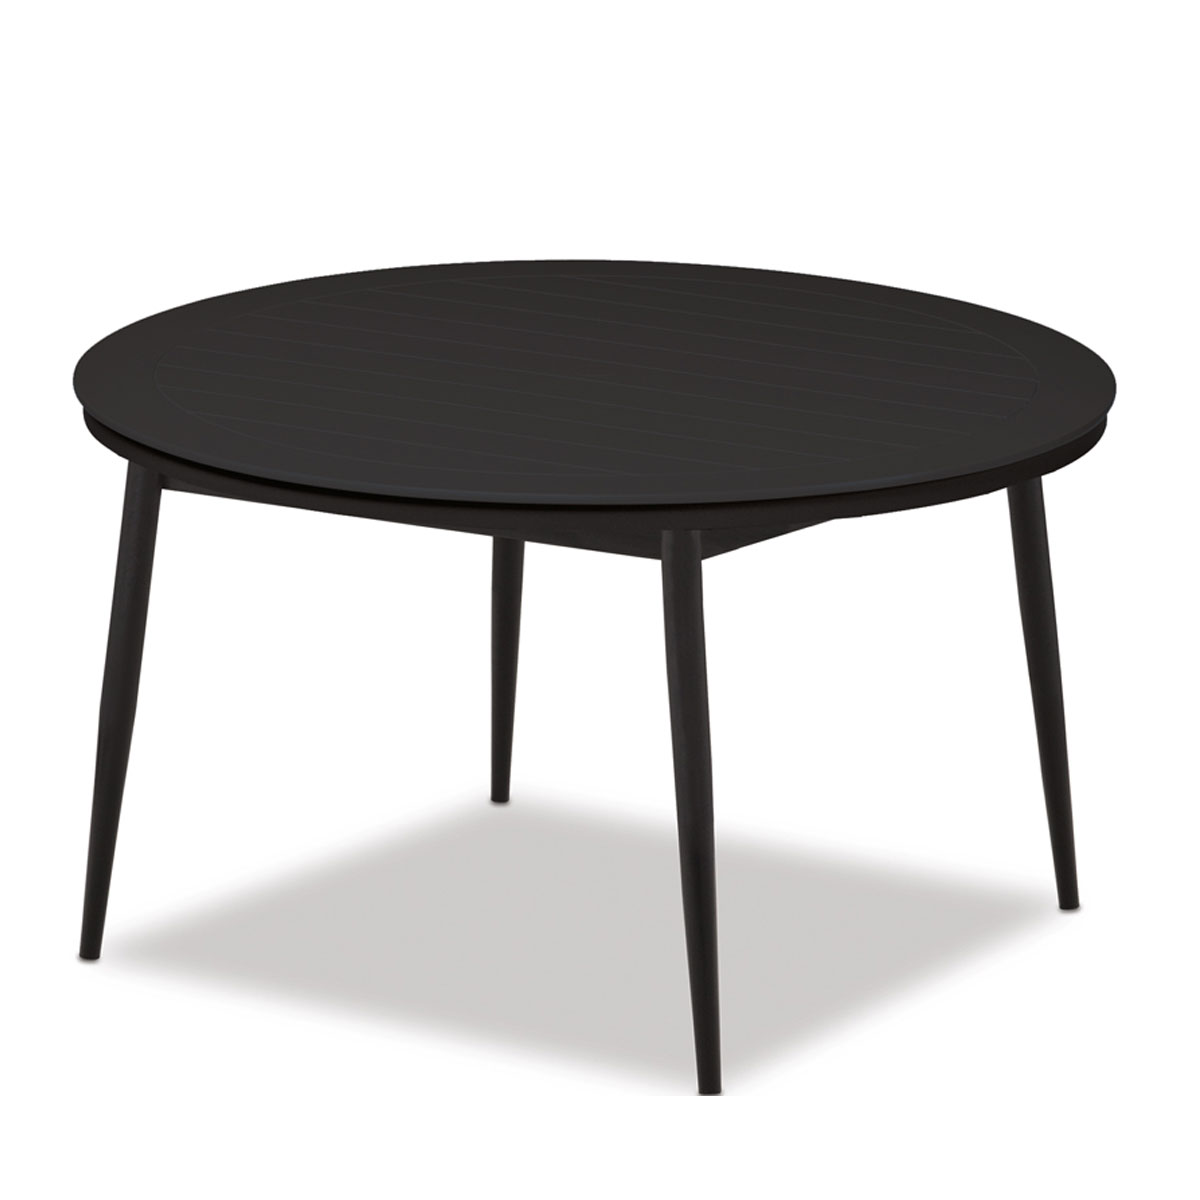 Telescope Casual MGP Top, 54 inch Round Dining Height Table with Tapered Legs (base and table top sold separately)